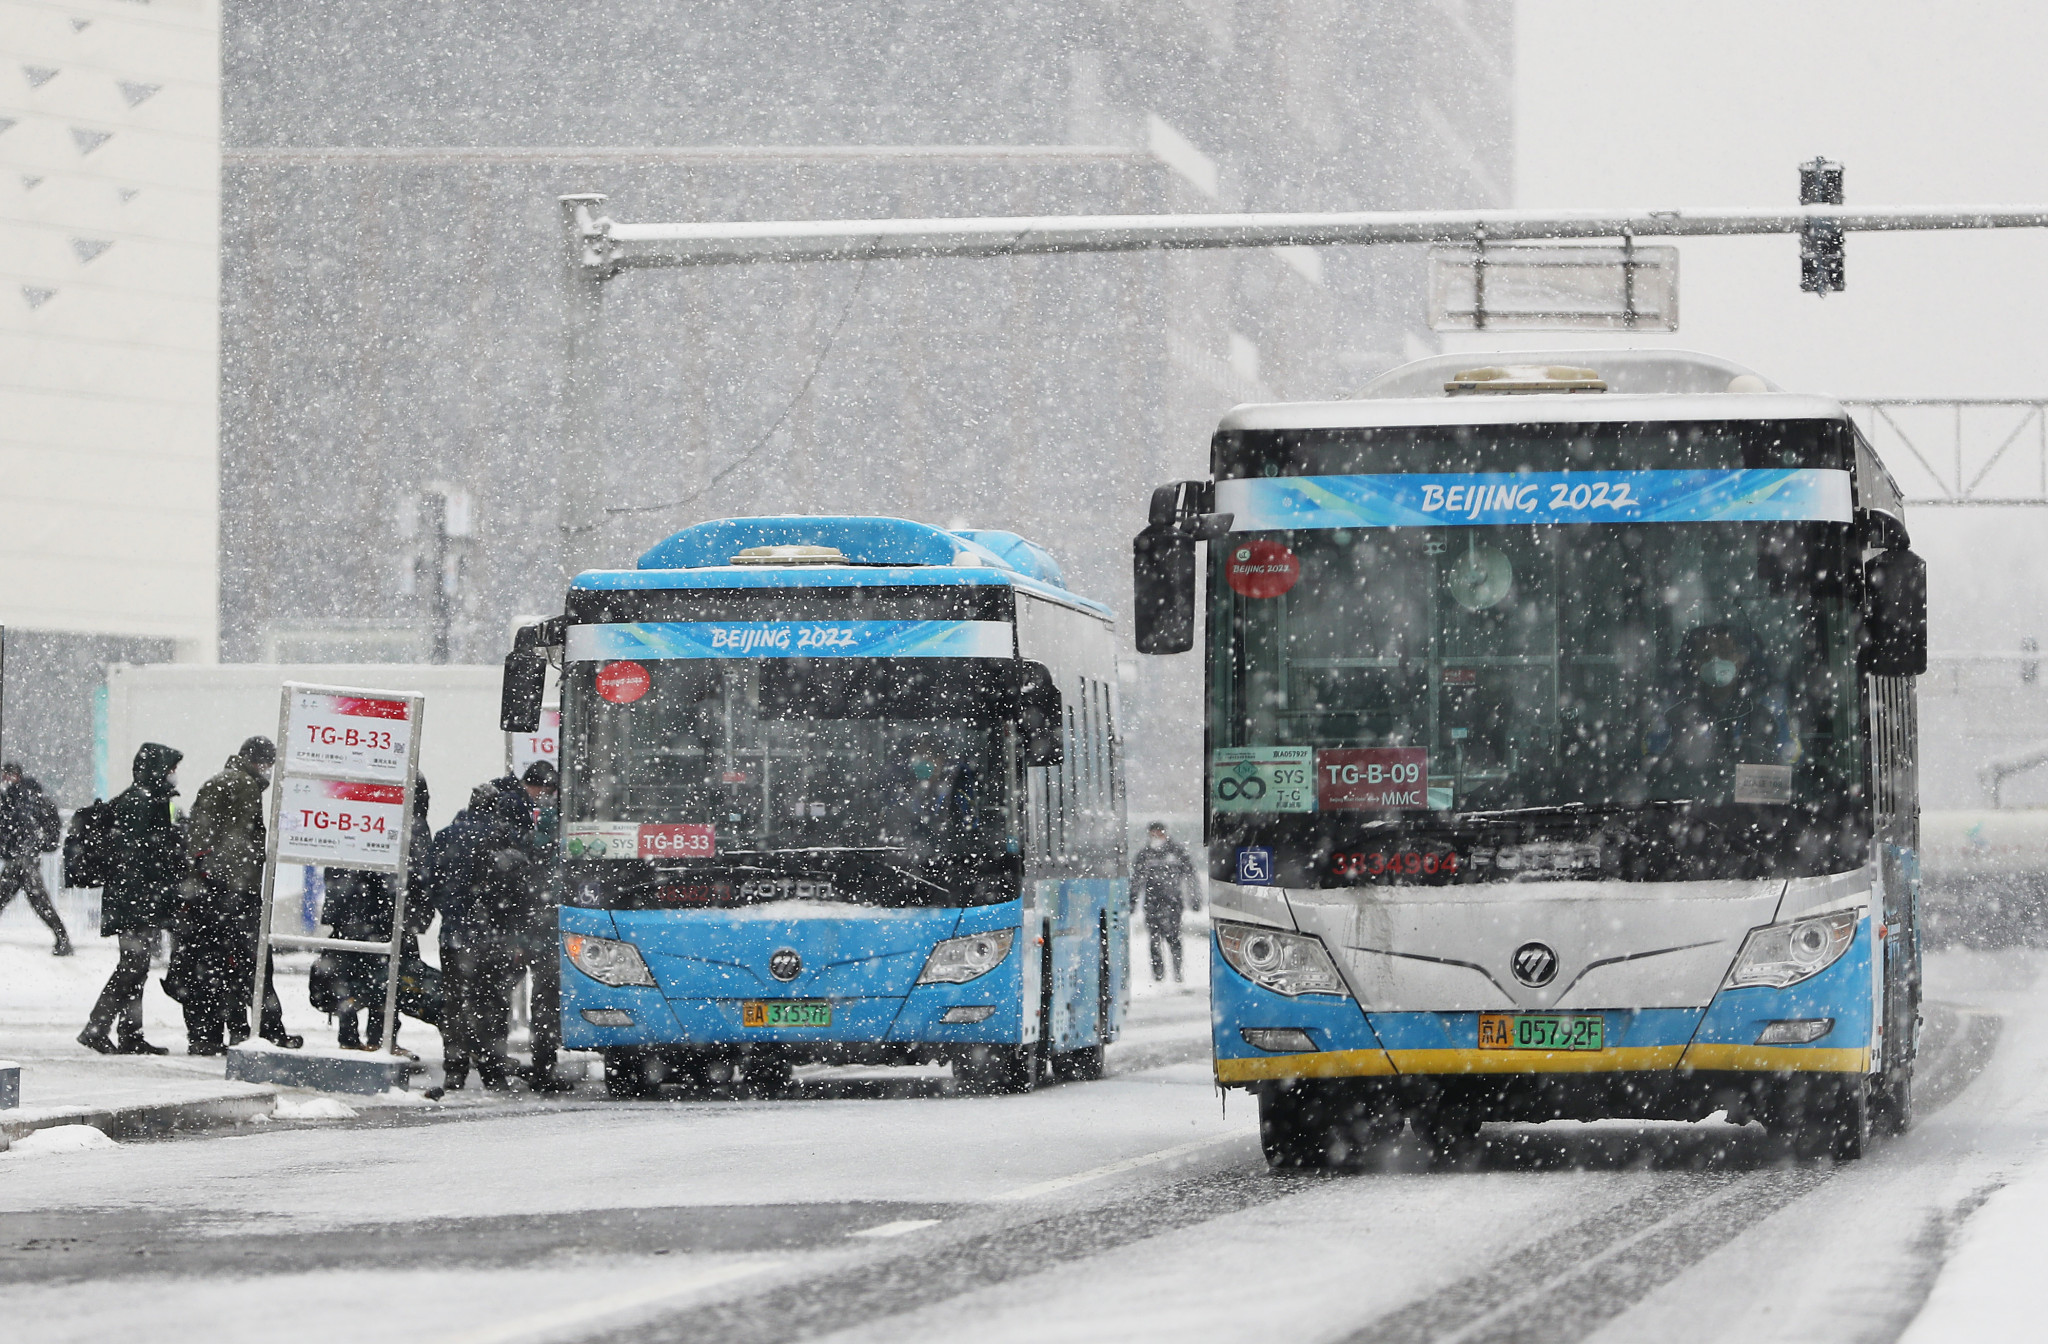 Beijing 2022 hydrogen buses prove popular in Zhangjiakou due to ability to start in cold weather